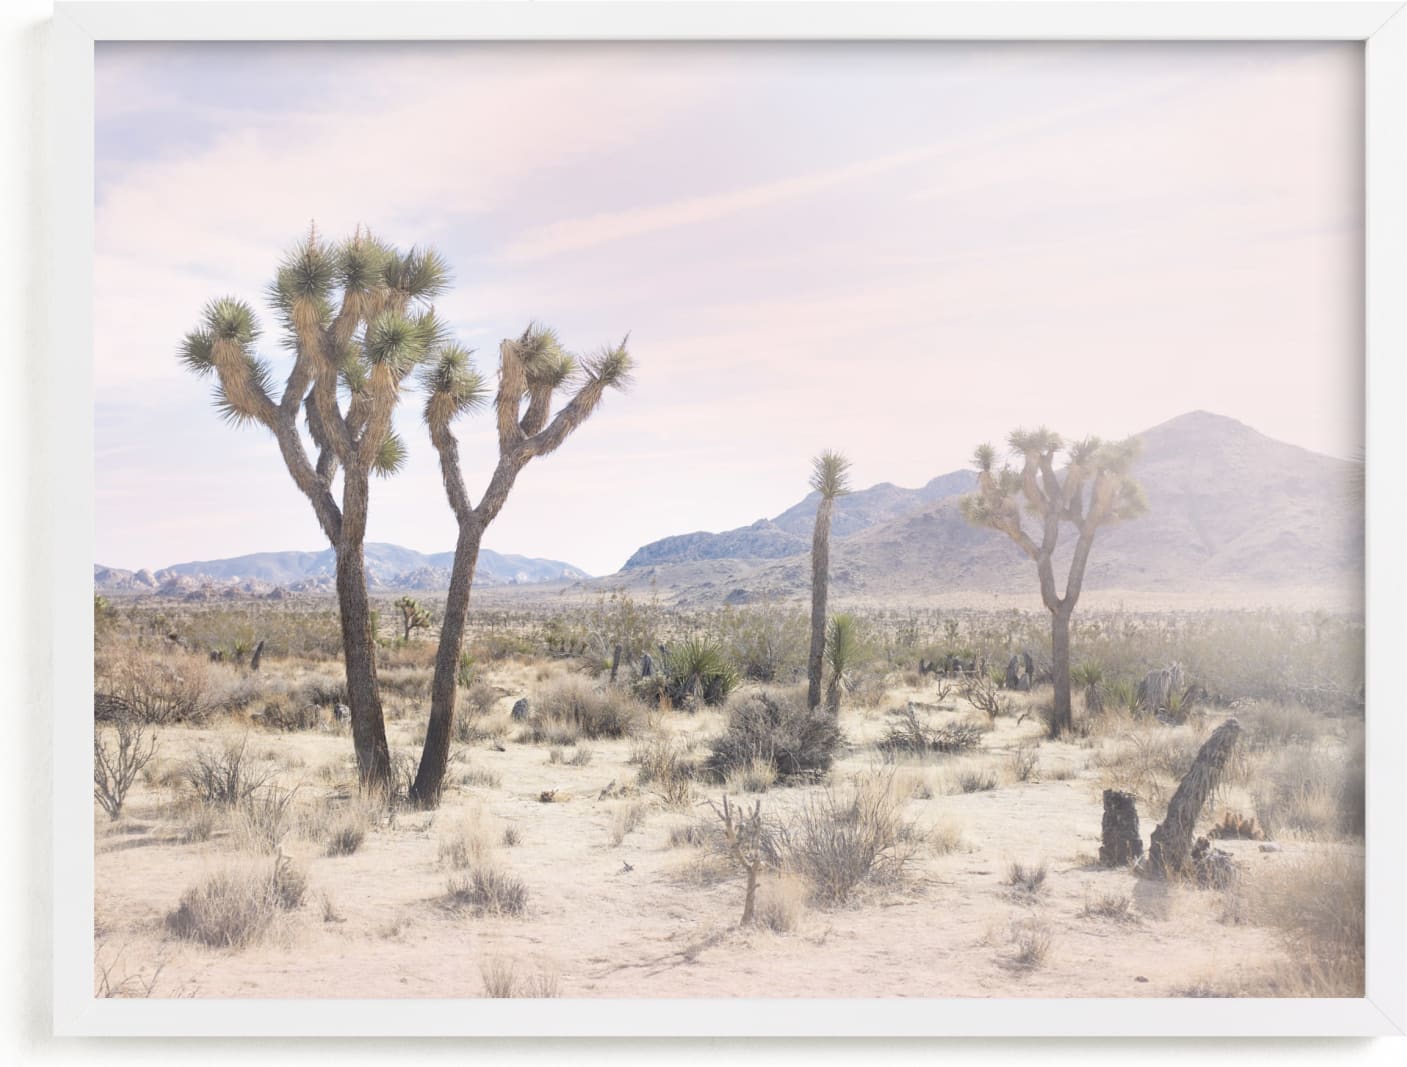 This is a brown art by Wilder California called Joshua Tree No. 10.